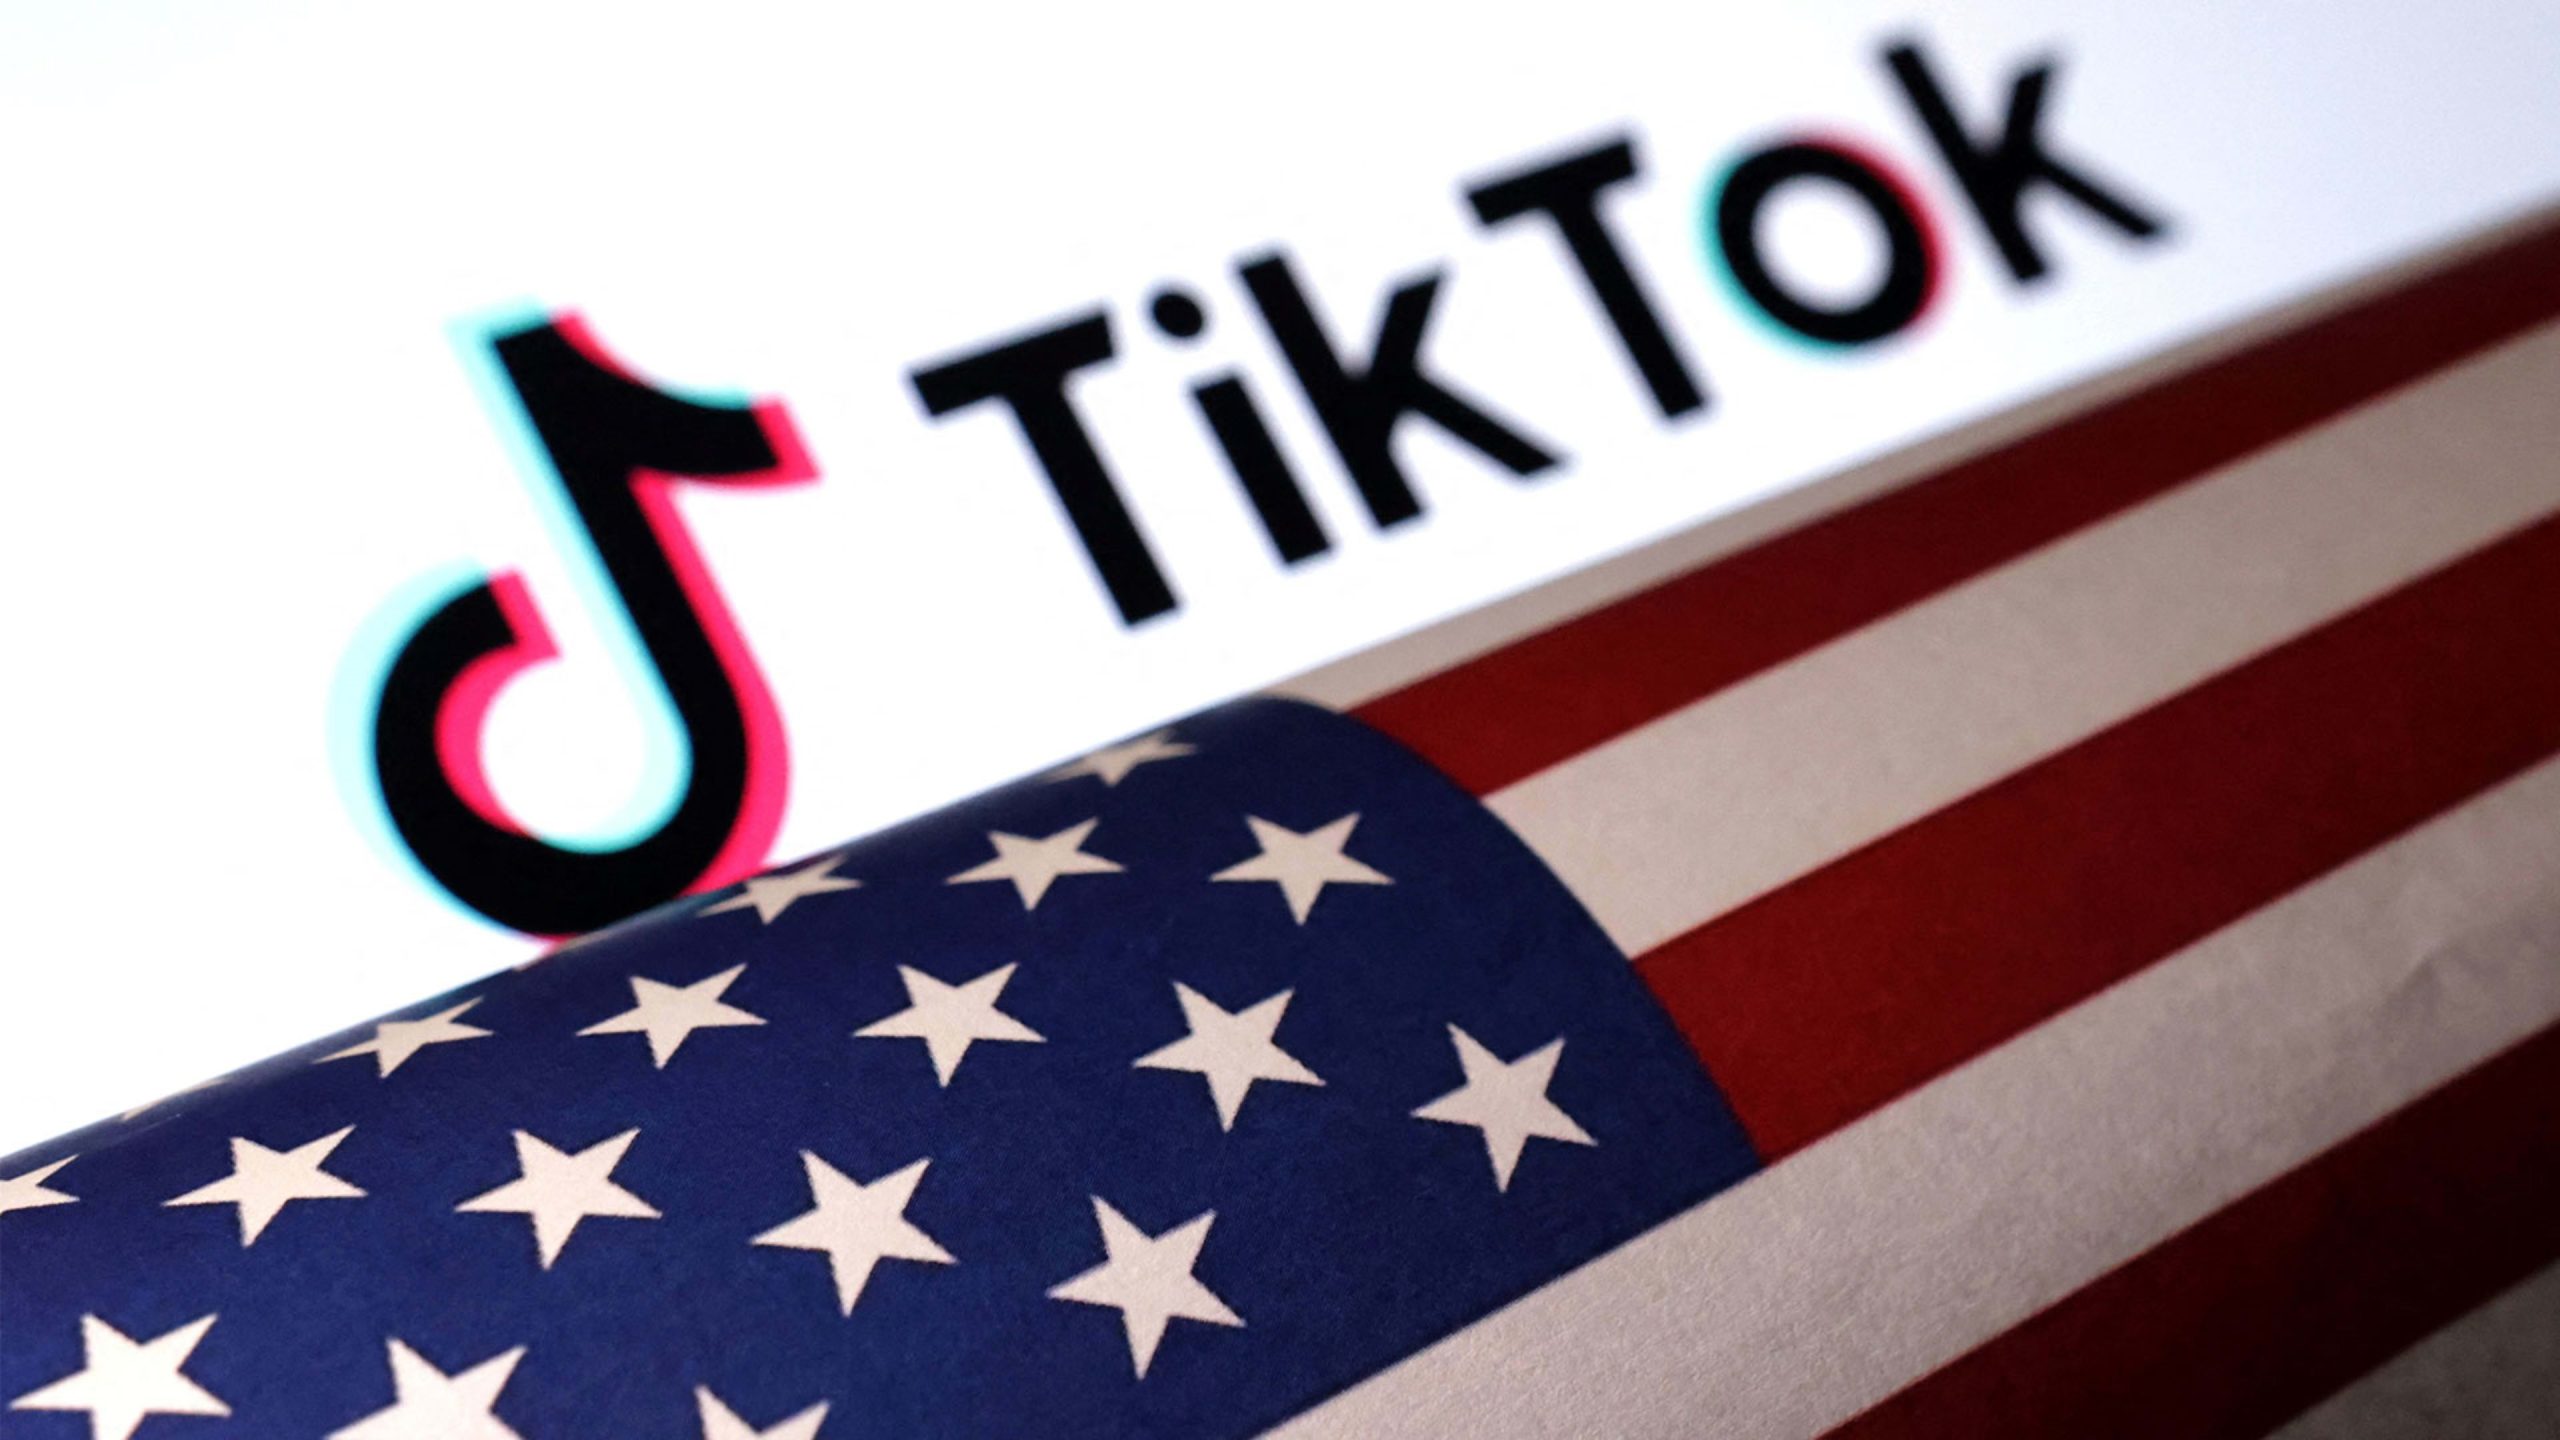 TikTok warns 170 million Americans could lose their free speech rights if U.S. bill is enacted